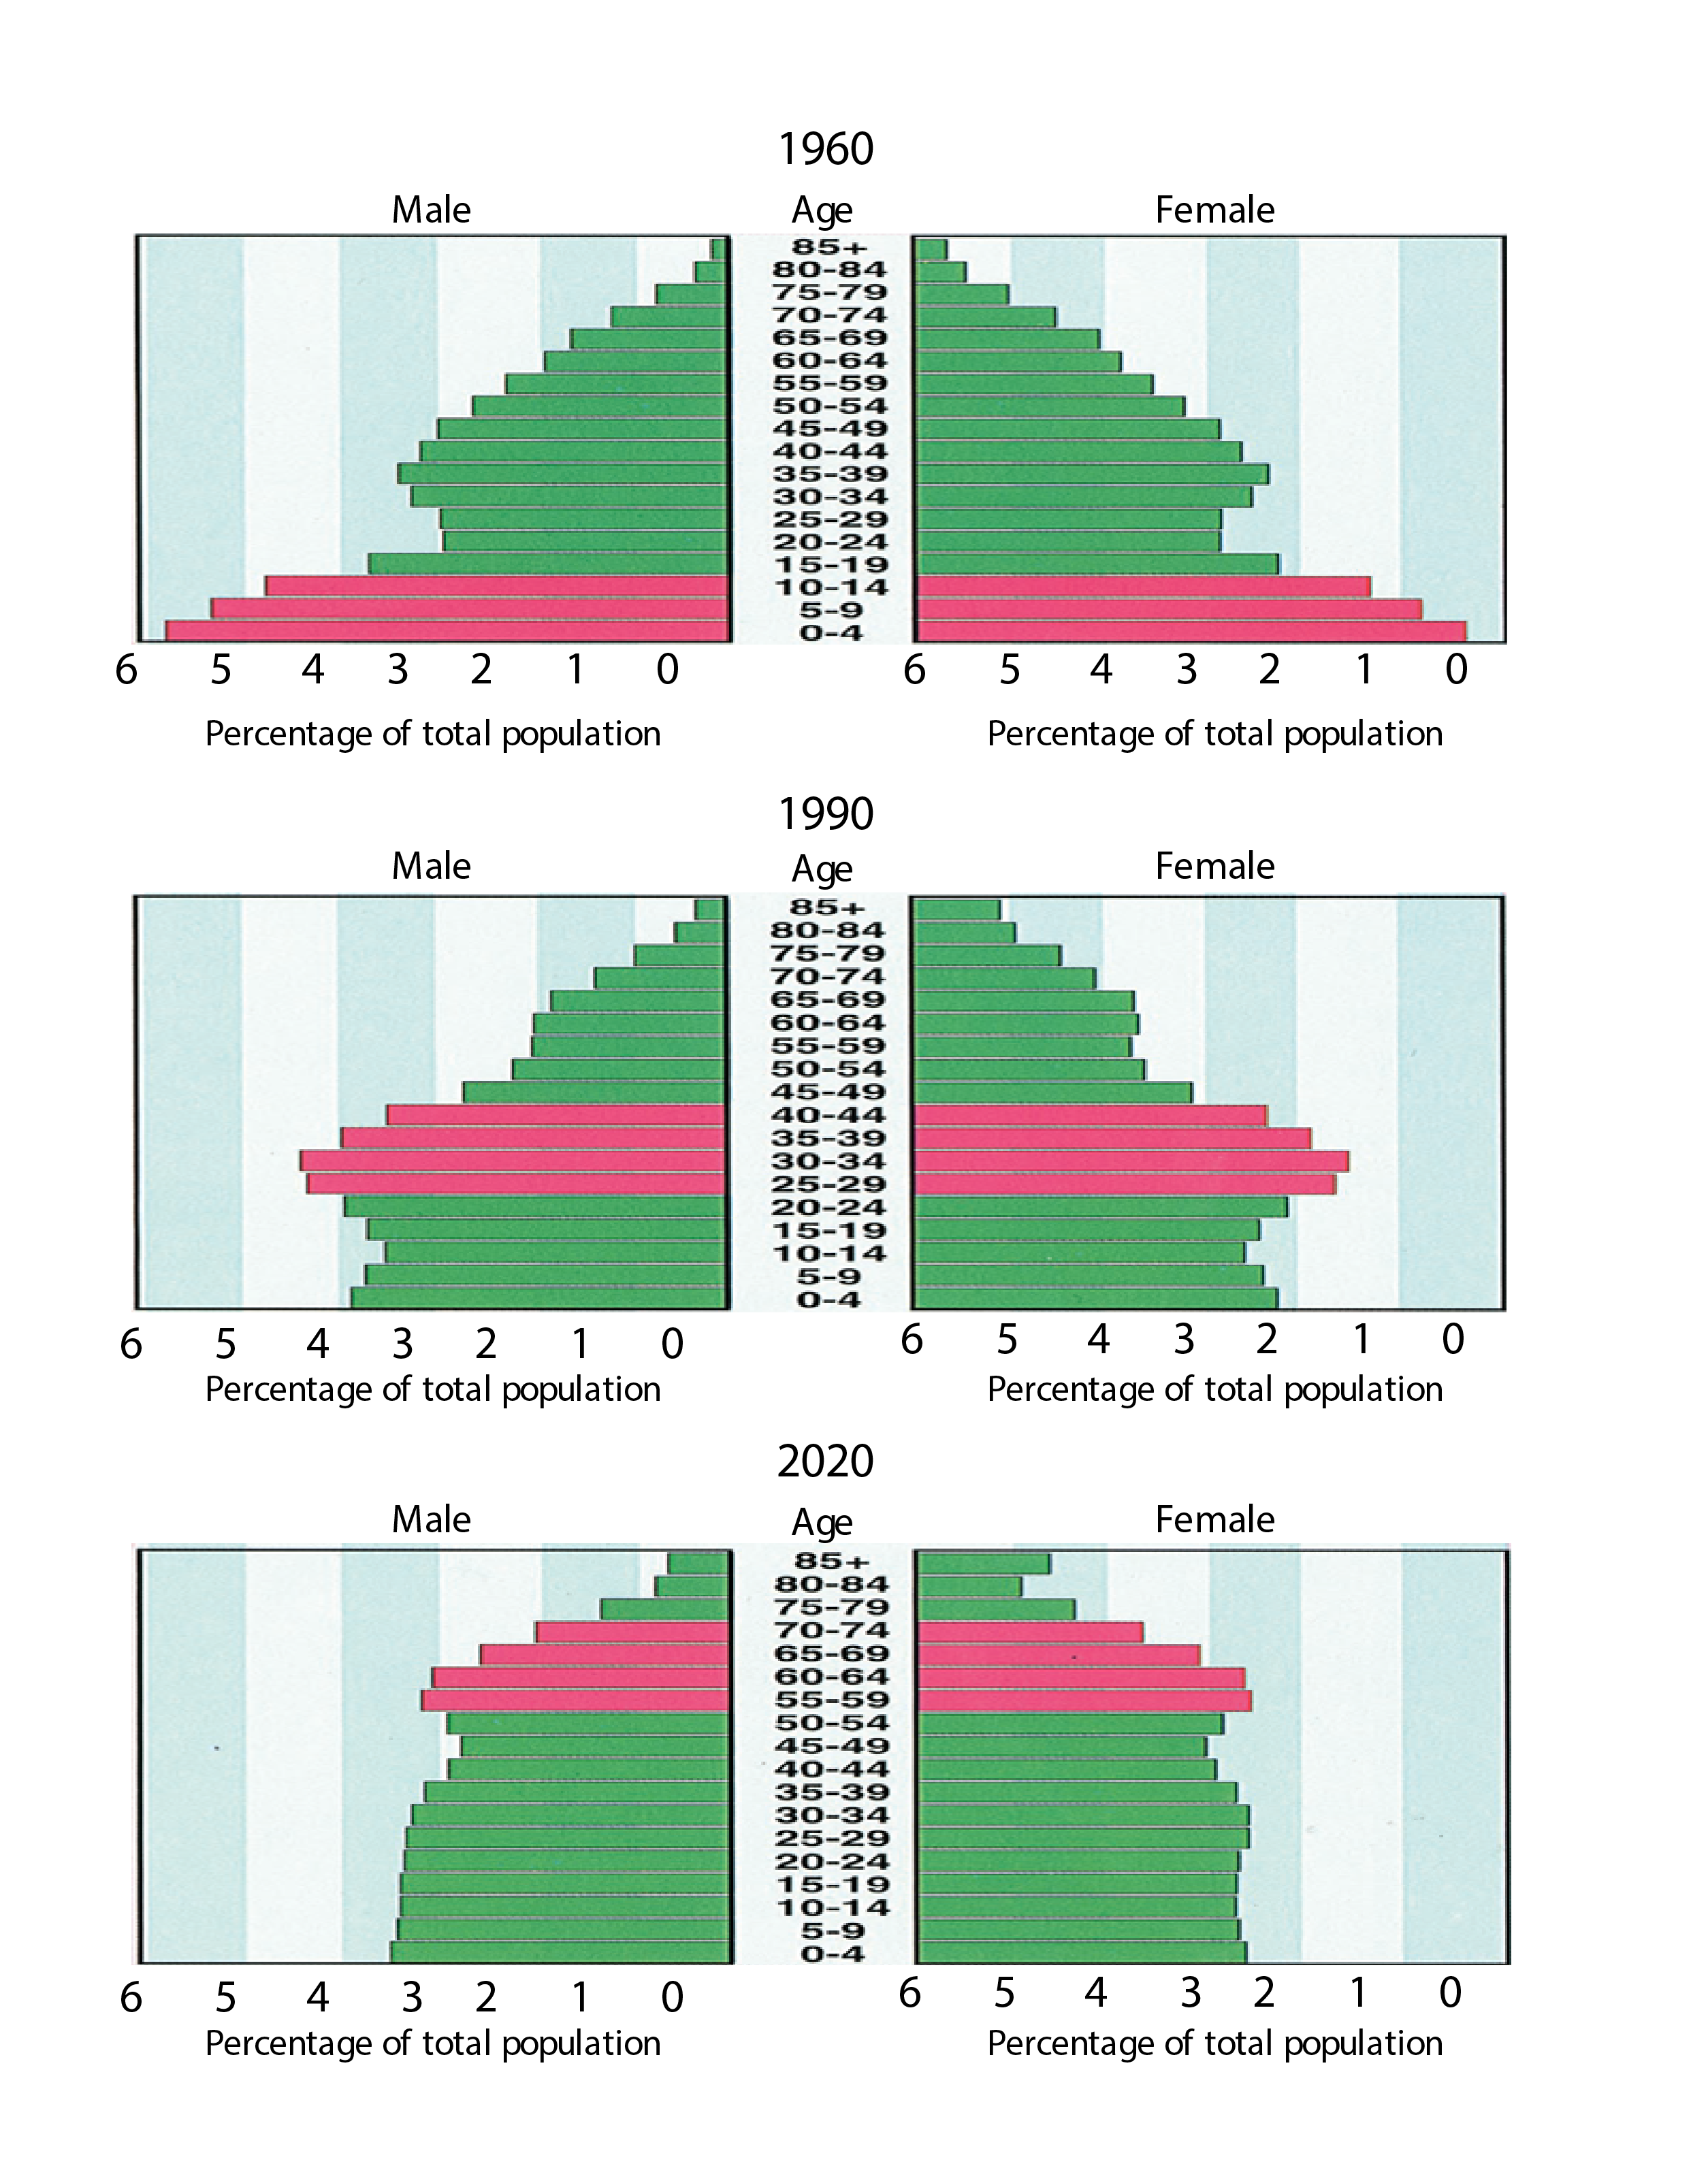 Three horizontal bar charts display male and female percentages of total population by age. The bar charts include data from three years: 1960, 1990, and 2020. Each bar chart shows data from the baby boomer generation (pink) and the Millennial generation. Percentages were similar for both males and females. In 1960, the majority of the population were ages 0-14 and these were included in the baby boomer generation. These percentages continue to decline as age increases with the Millennial generation, with the lowest percentages being ages 85 and older. In 1990, the baby boomer generation was aged 25-44 and these represented the larger percentages of the total population. These percentages continue to decline as age increases with the Millennial generation, with the lowest percentages being ages 85 and older. Percentages also decline in the other direction from ages 0-24. In 2020, the baby boomer generation will be ages 55-74 and these will represent the largest percentages of the total population. These percentages continue to decline as age increases with the Millennial generation, with the lowest percentages being ages 85 and older. Percentages also decline in the other direction from ages 0-54. Source: U.S. Bureau of the Census. 